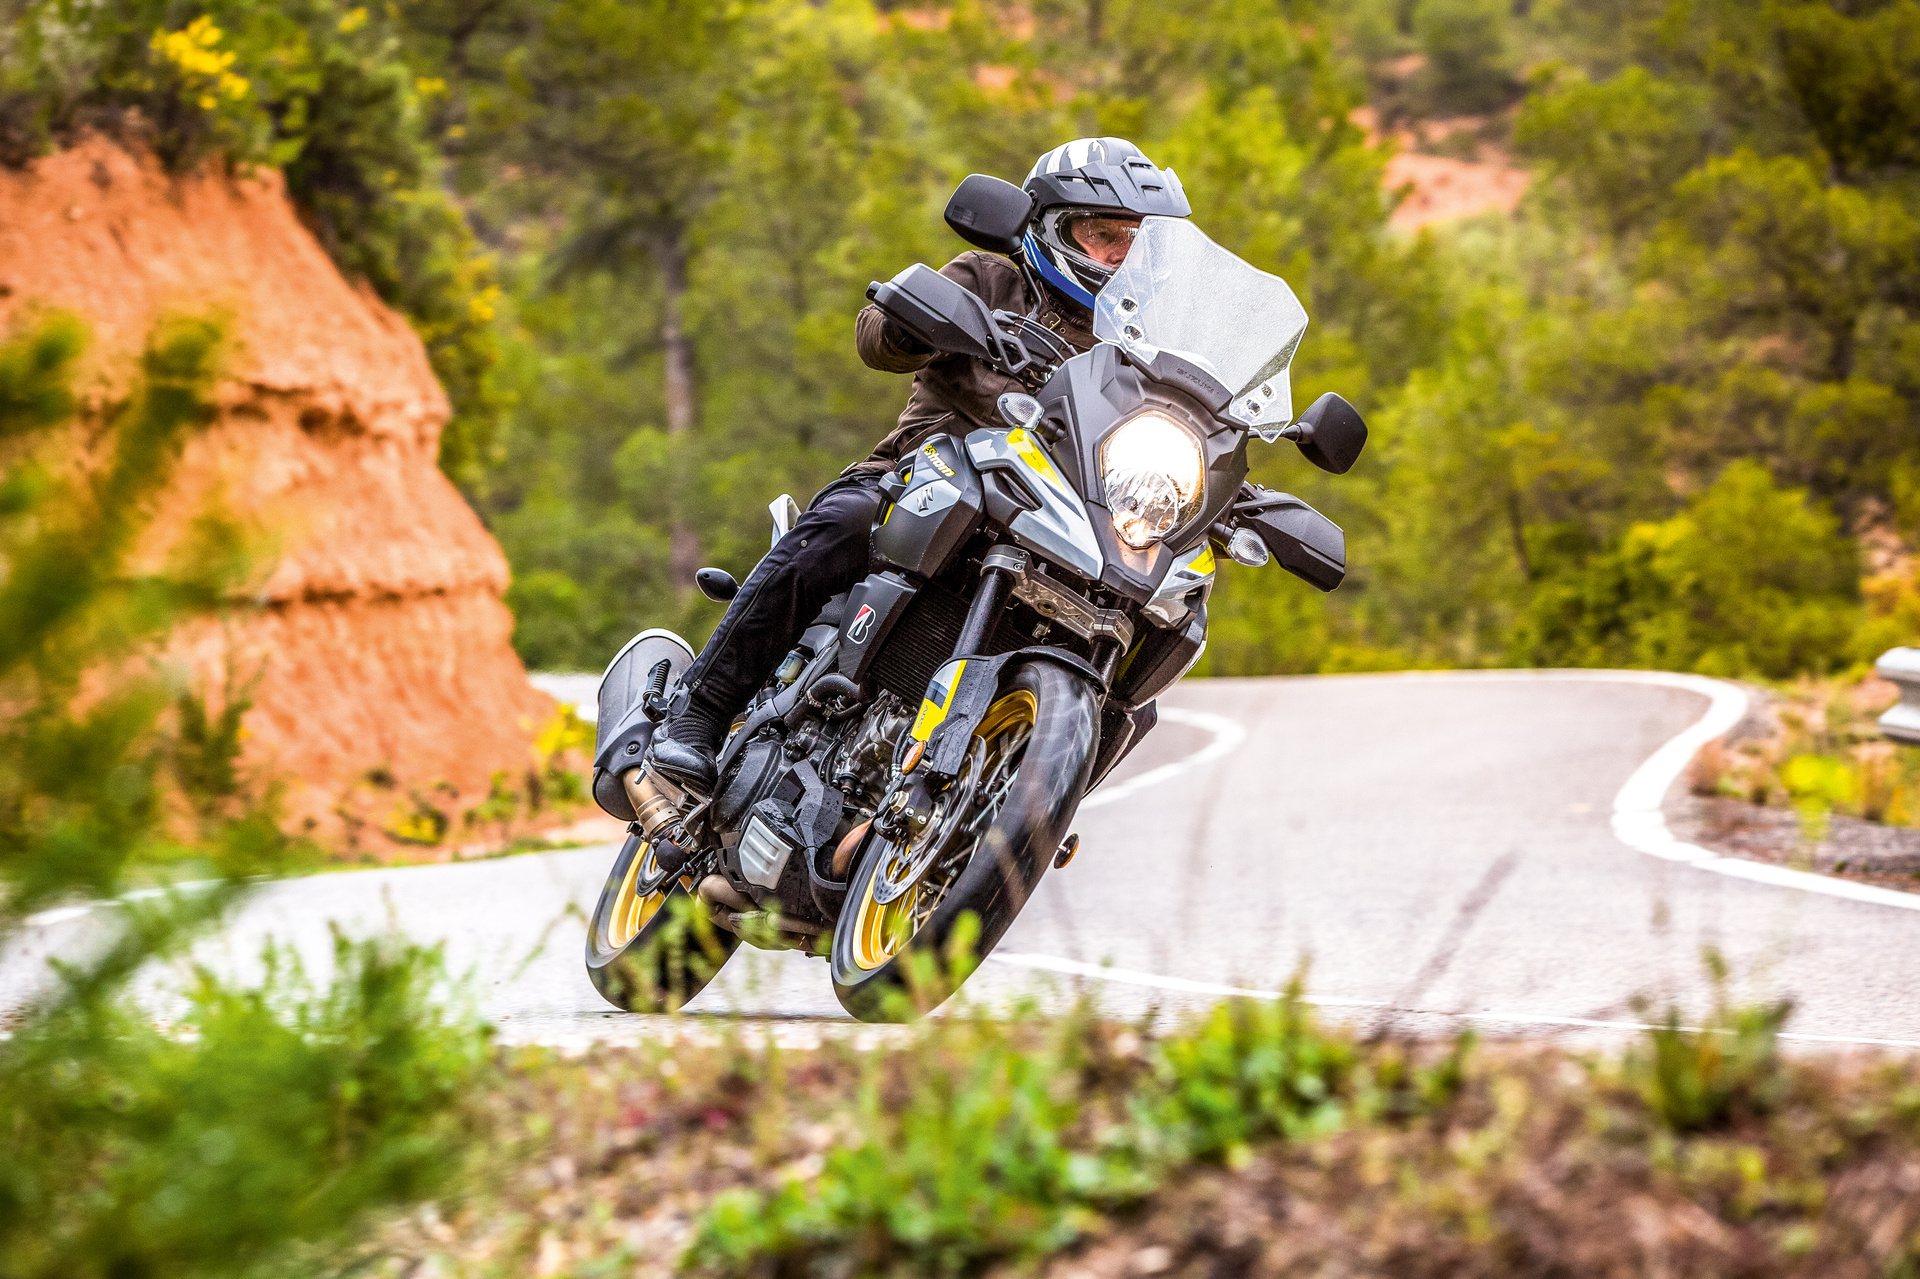 Suzuki V-Strom 650, Motorcycle and travel, Adventure on two wheels, Perfect combo, 1920x1280 HD Desktop